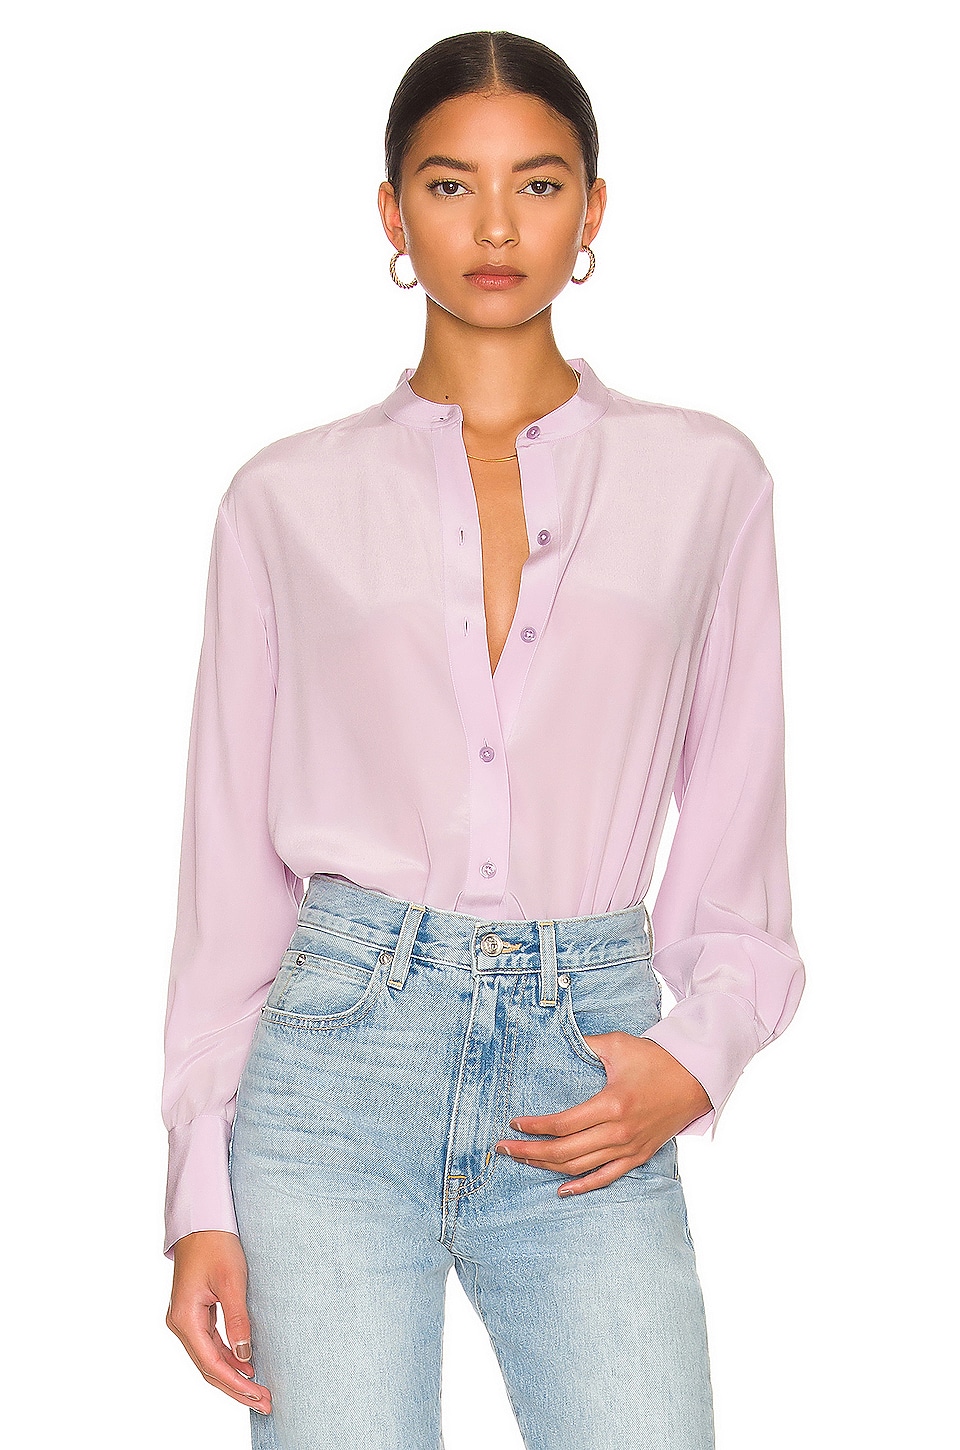 Equipment Leonee Blouse in Orchid | REVOLVE